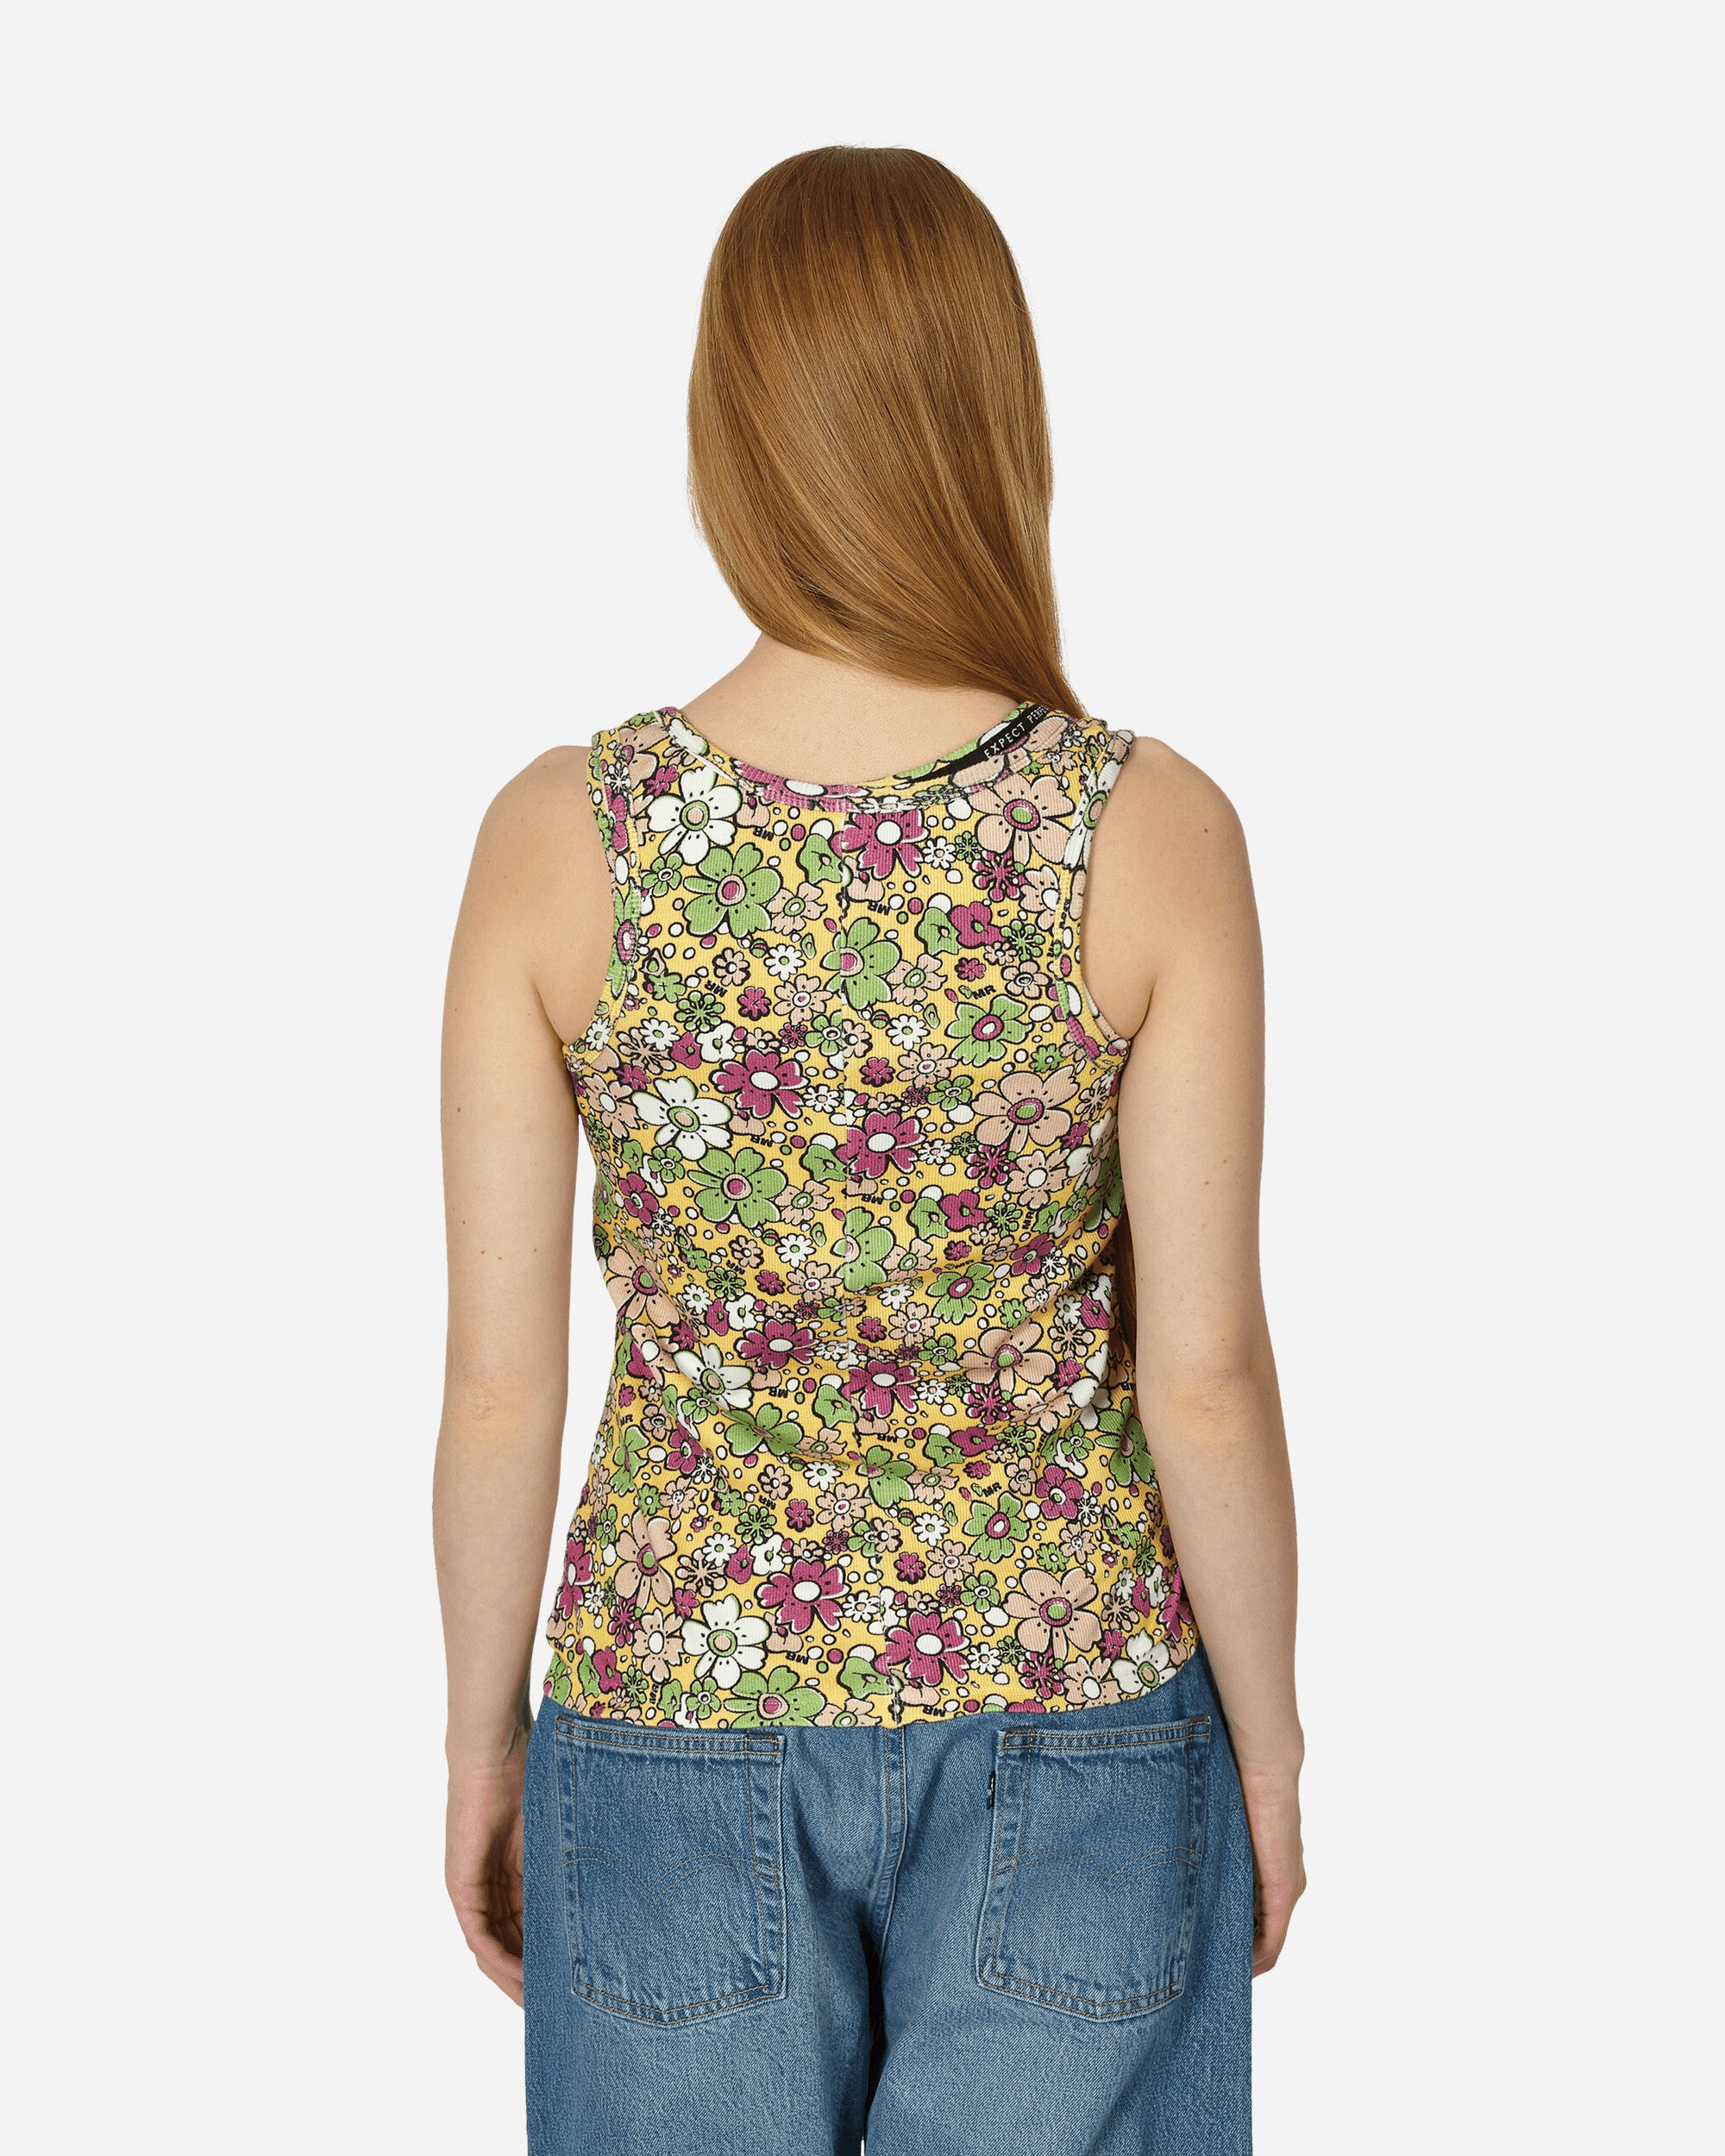 Martine Rose Wmns Folded Top Festival Floral T-Shirts Top MRSS24-634B FESFLO